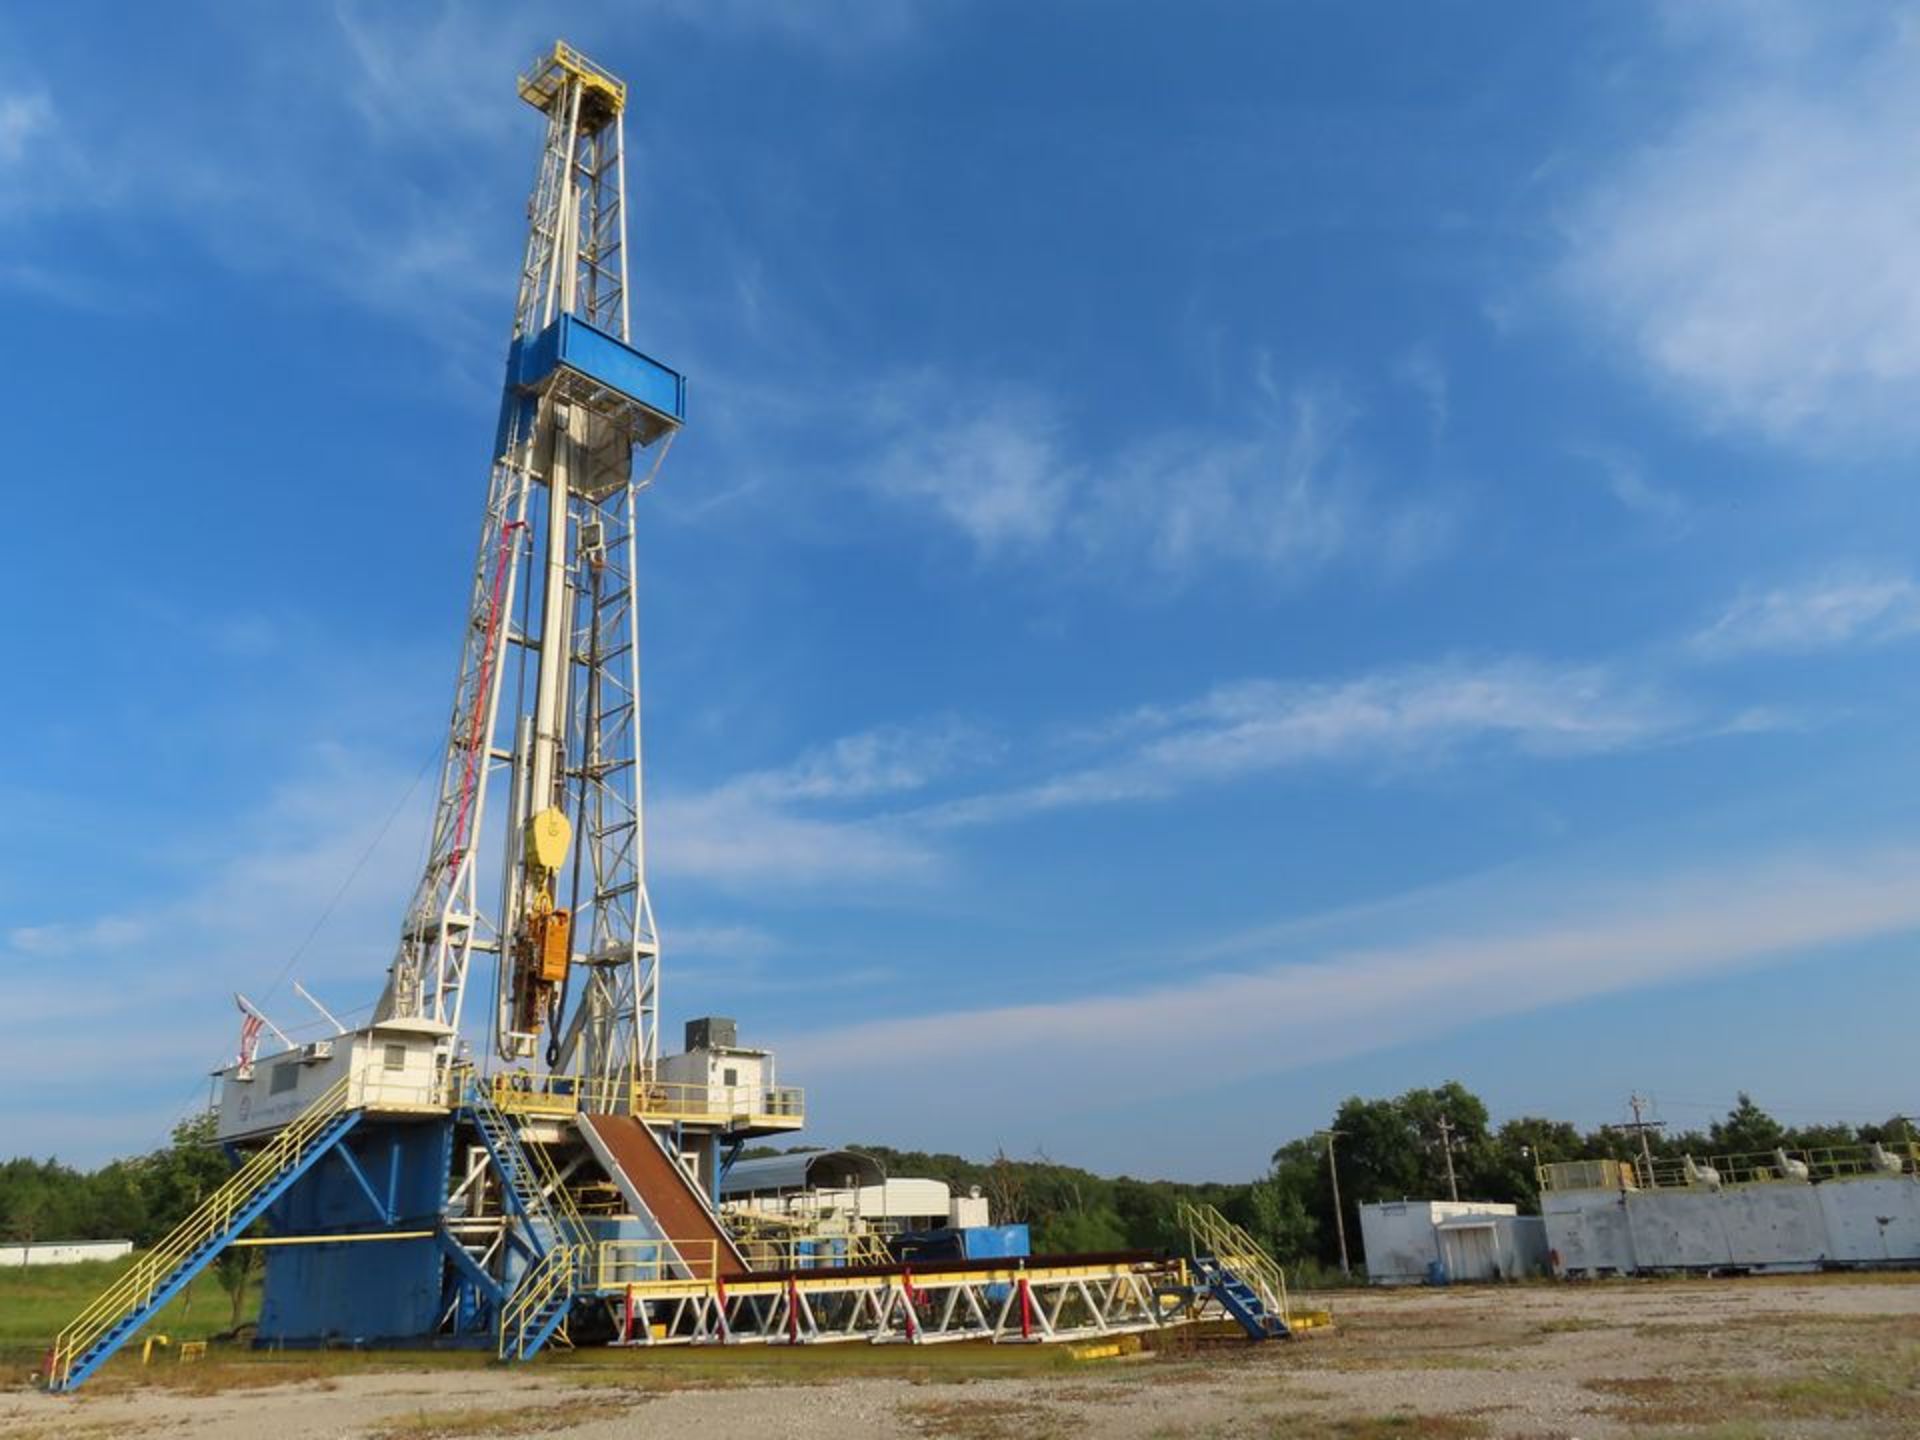 COMPLETE RIG PACKAGE - CONTINENTAL EMSCO 1000 HP SCR DRILLING RIG PACKAGE, INCLUDES LOT#'S 2-27: